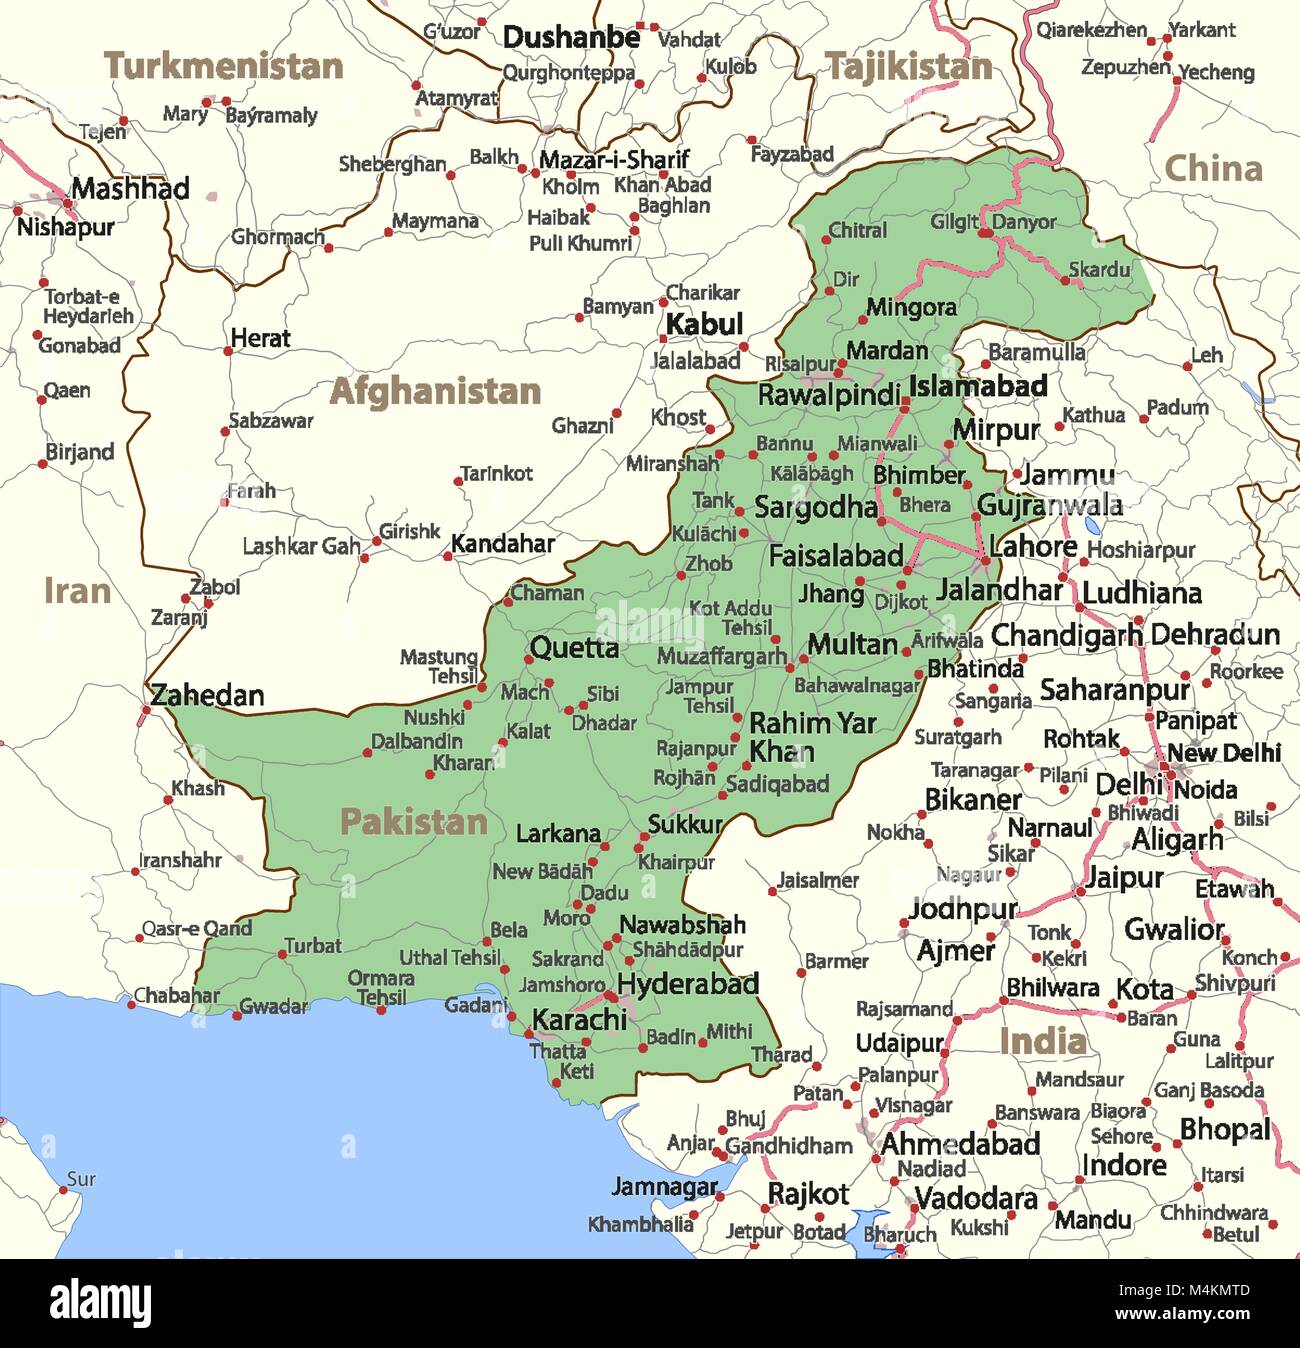 Map of Pakistan. Shows country borders, urban areas, place names and roads. Labels in English where possible. Projection: Mercator. Stock Vector